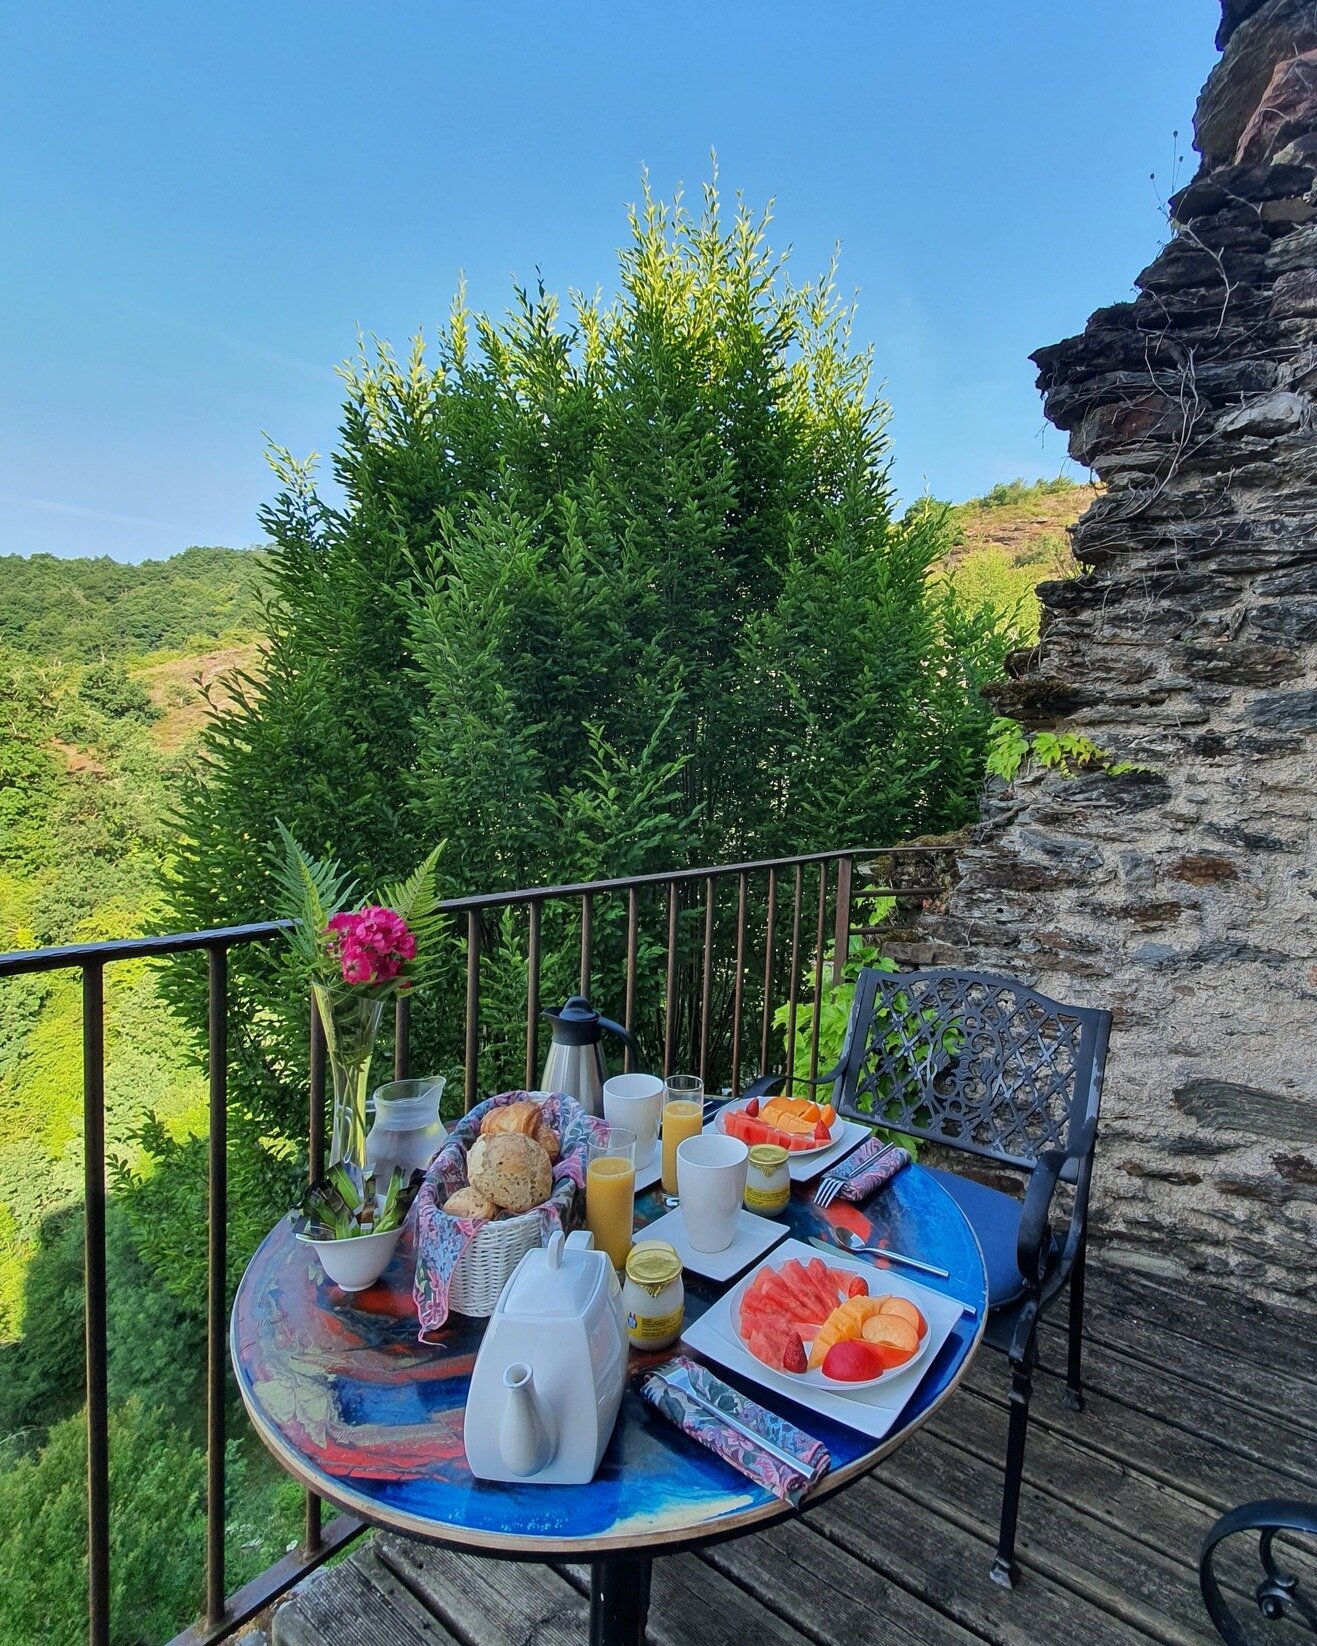 🥐☕🍉 The perfect breakfast at the perfect place!

#chateaubelcastel #TowerSuite #suite #luxury #suiteview #suitestyle #chambredhote #Chambredhotesdecharme #guest #bedandbreakfast #bnb #sleephere #ch&acirc;teau #dormirauchateau #ideescadeaux #ch&acir